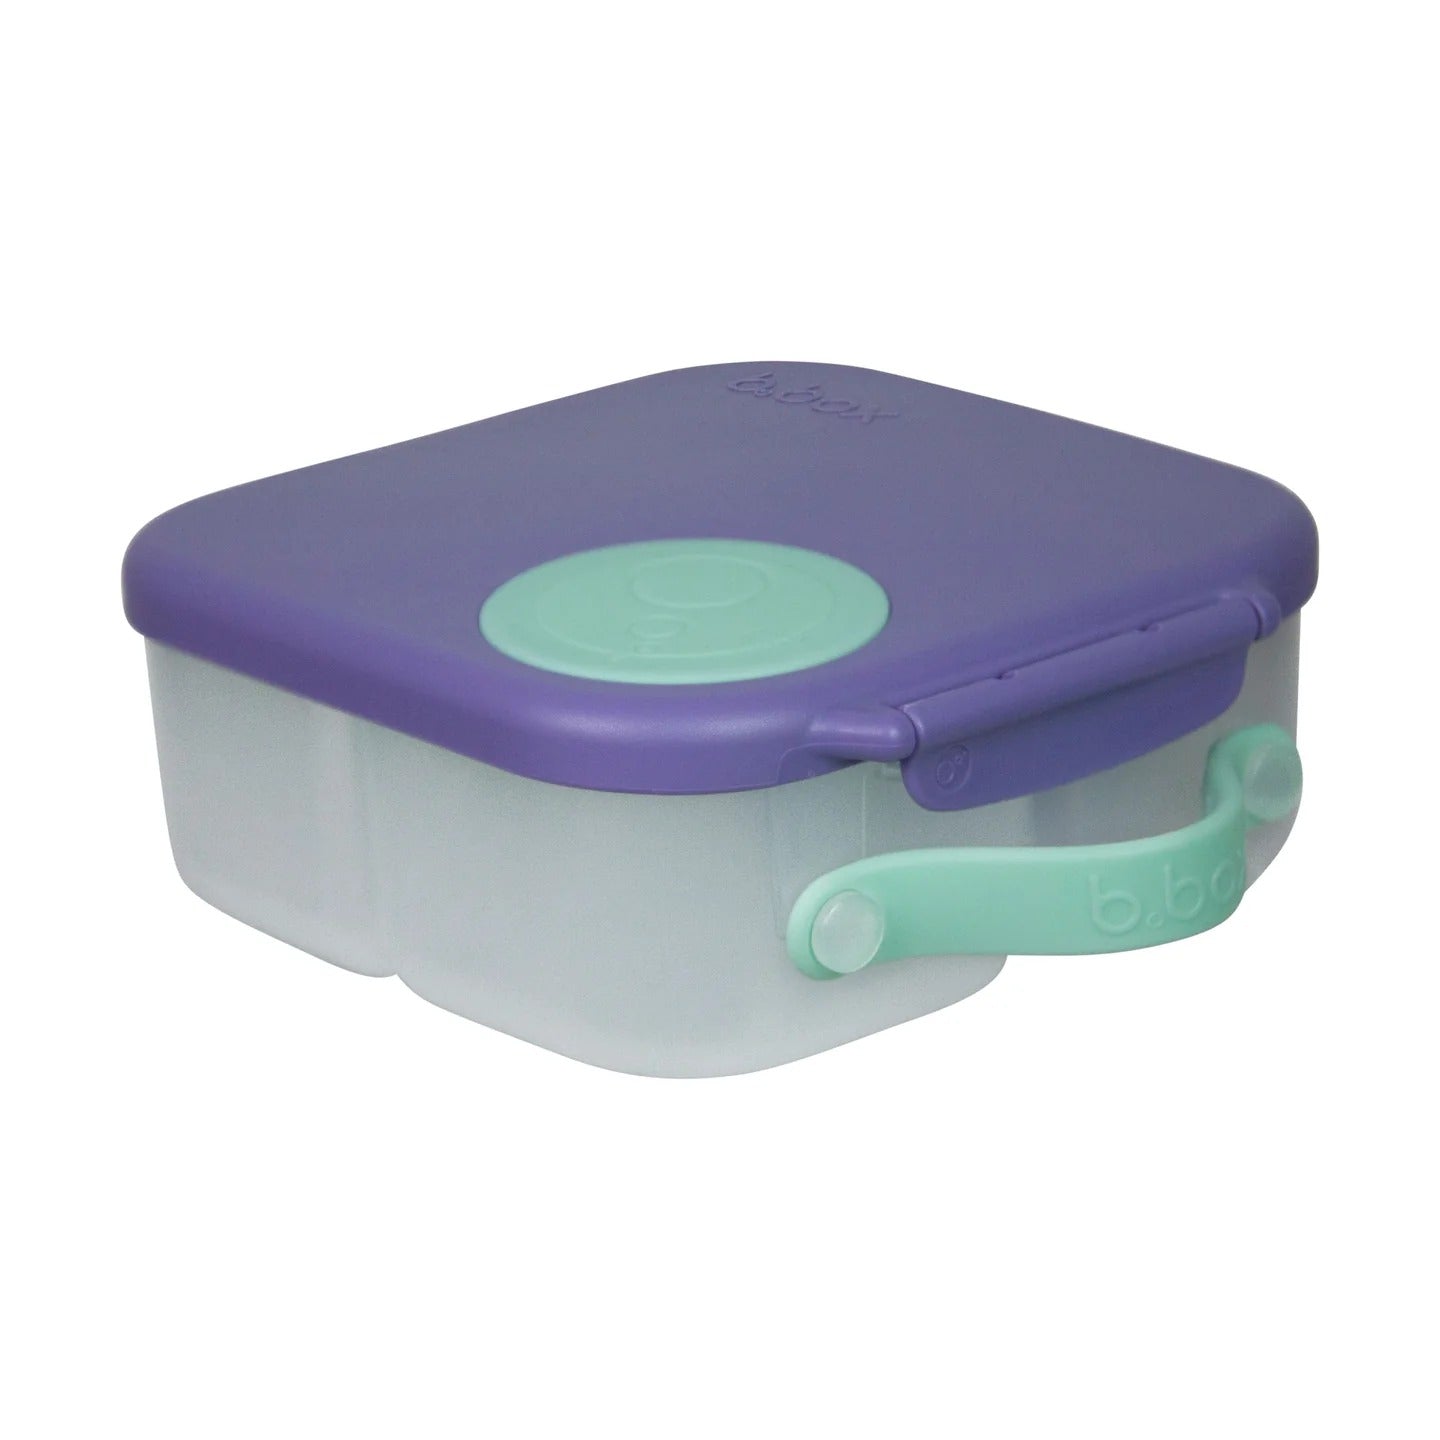 B.box Mini Lunchbox in Lilac Pop available at Bear & Moo